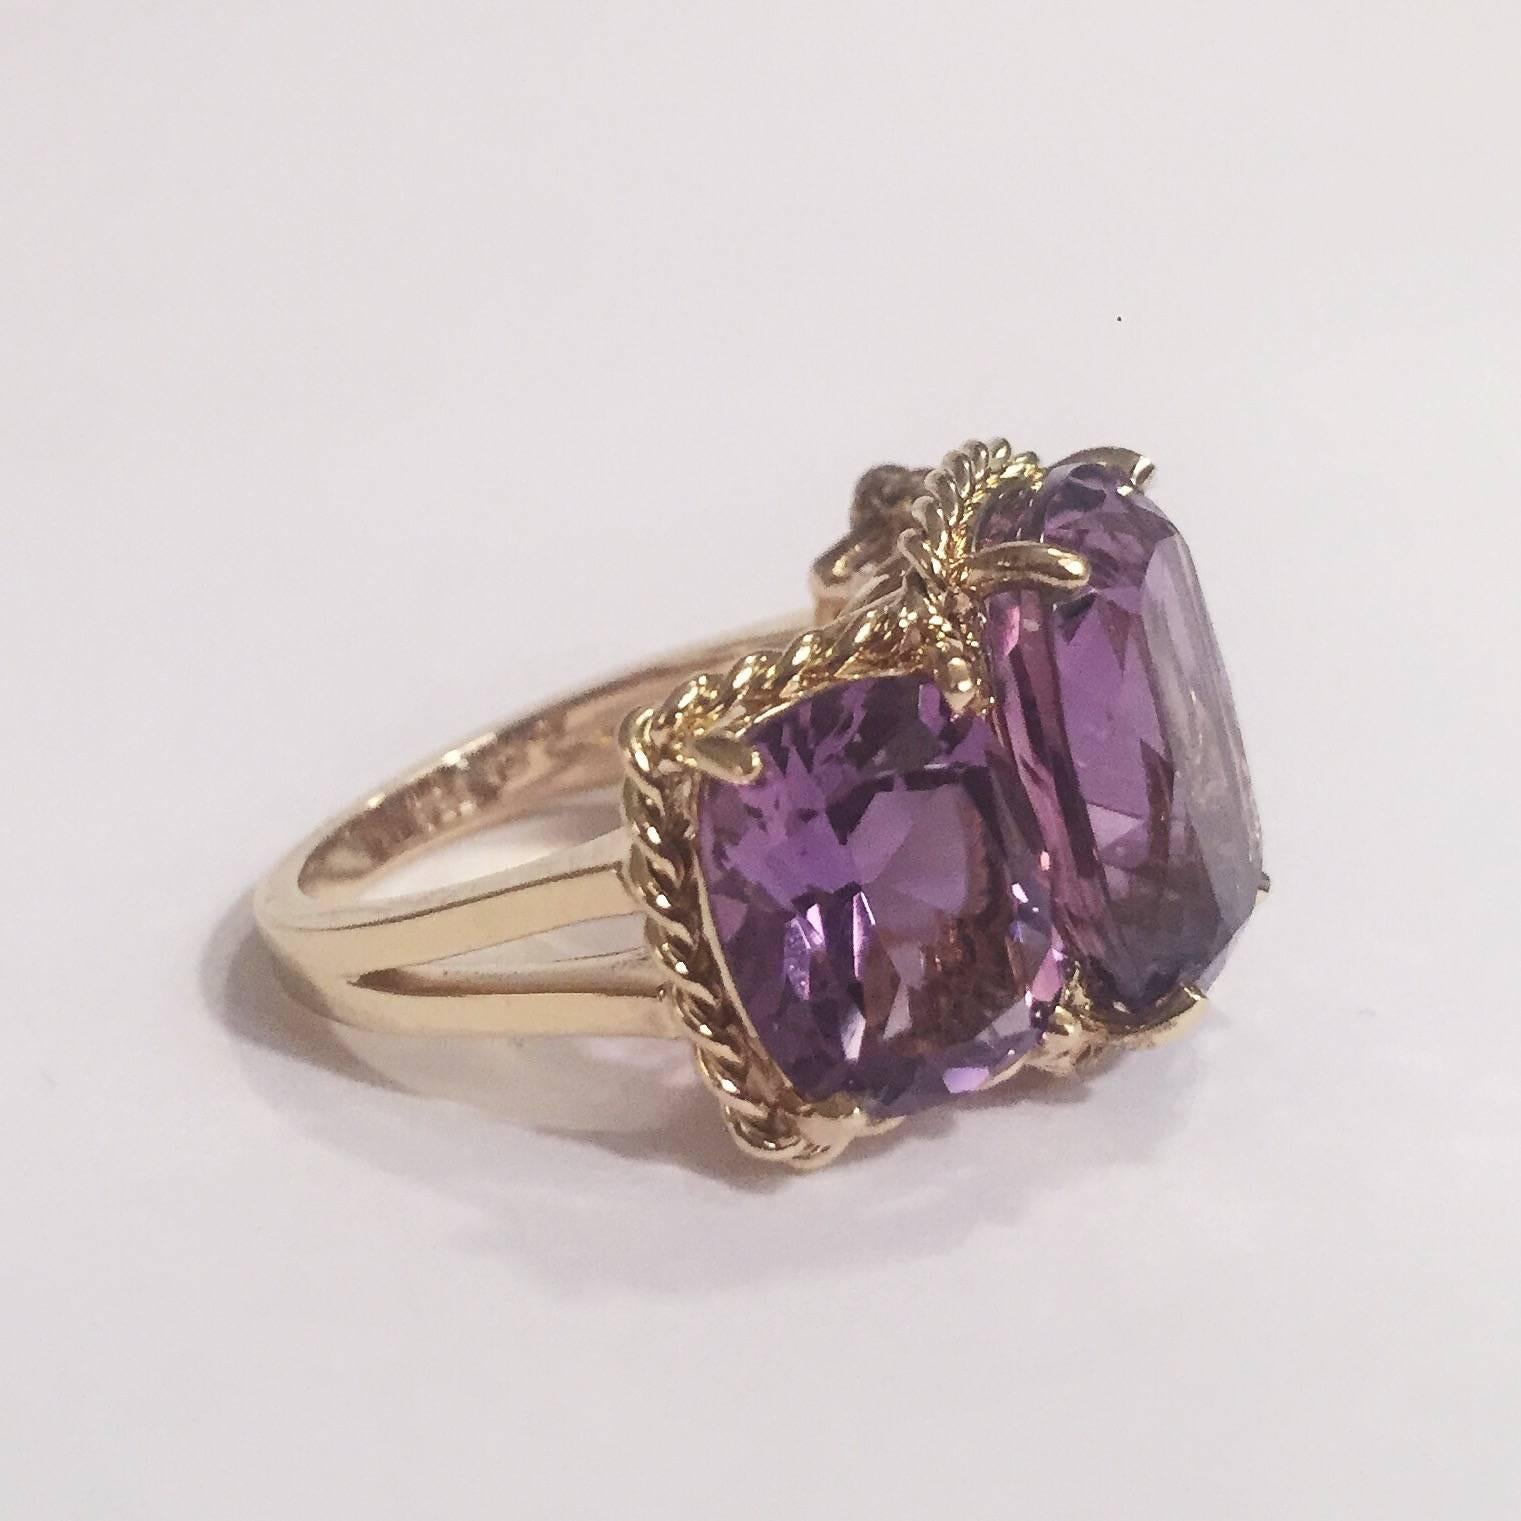 Elegant 18kt Yellow Three Stone Amethyst Ring with Rope Twist Border with split shank detail. 

The ring features faceted cushion cut Amethyst stones surrounded by twisted gold rope. The center Amethyst measures 5/8